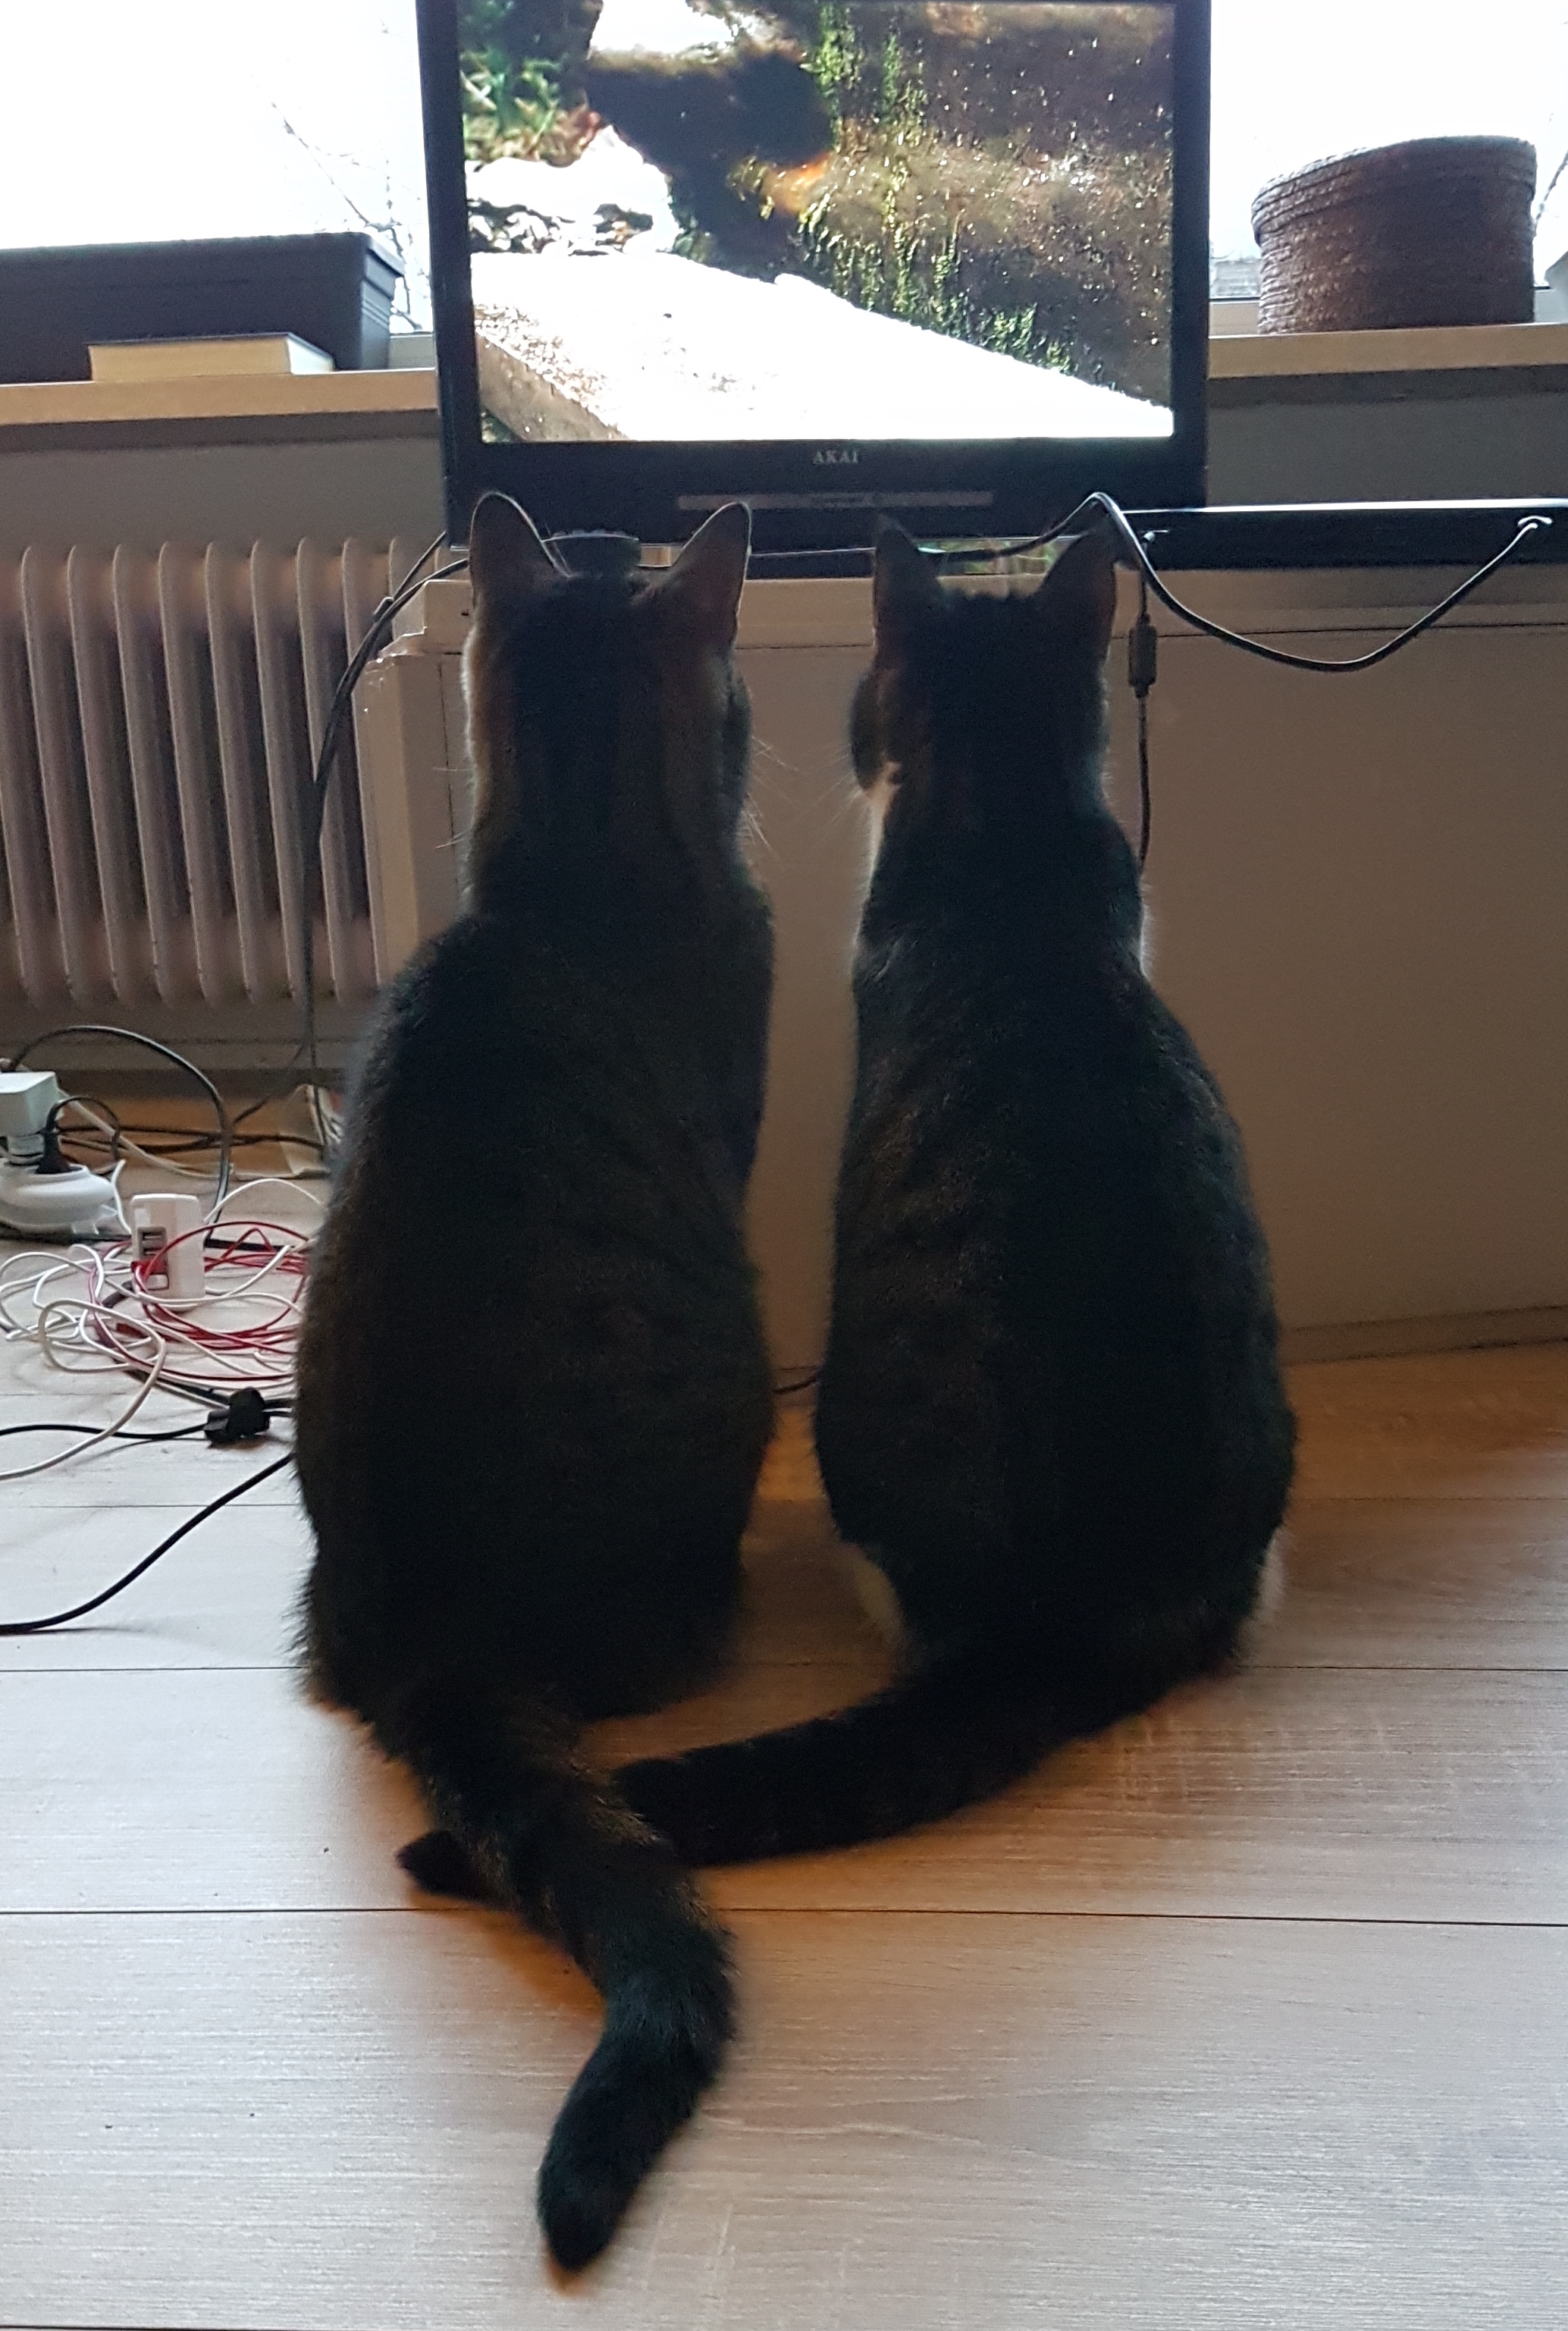 The bird channel provides a welcome distraction when the cats won’t leave me alone in the morning and keep butting into me to demand stimulation. This happens when there are no real-life birds in front of our flat window to gaze at with sweet murder in their eyes.